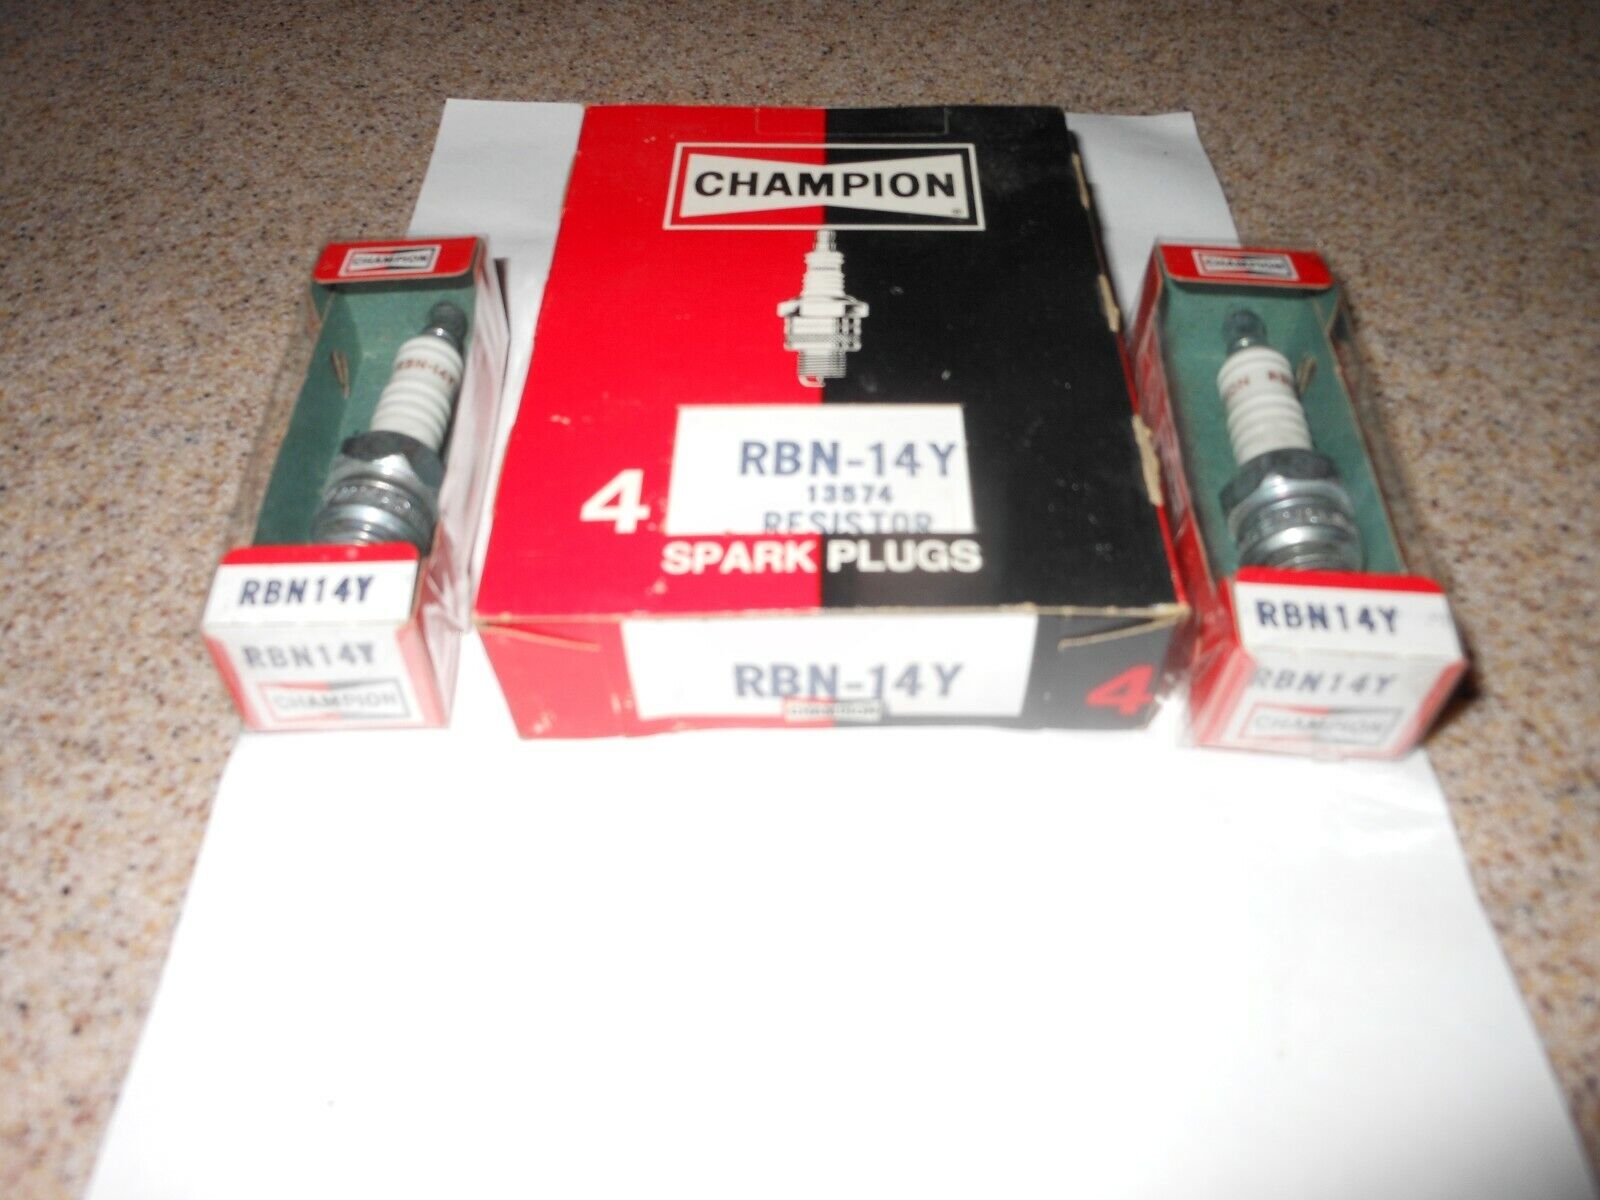 6 SIX CHAMPION RBN-14Y SPARK PLUGS  11.94  1.99 EACH  FREE SHIPPING 